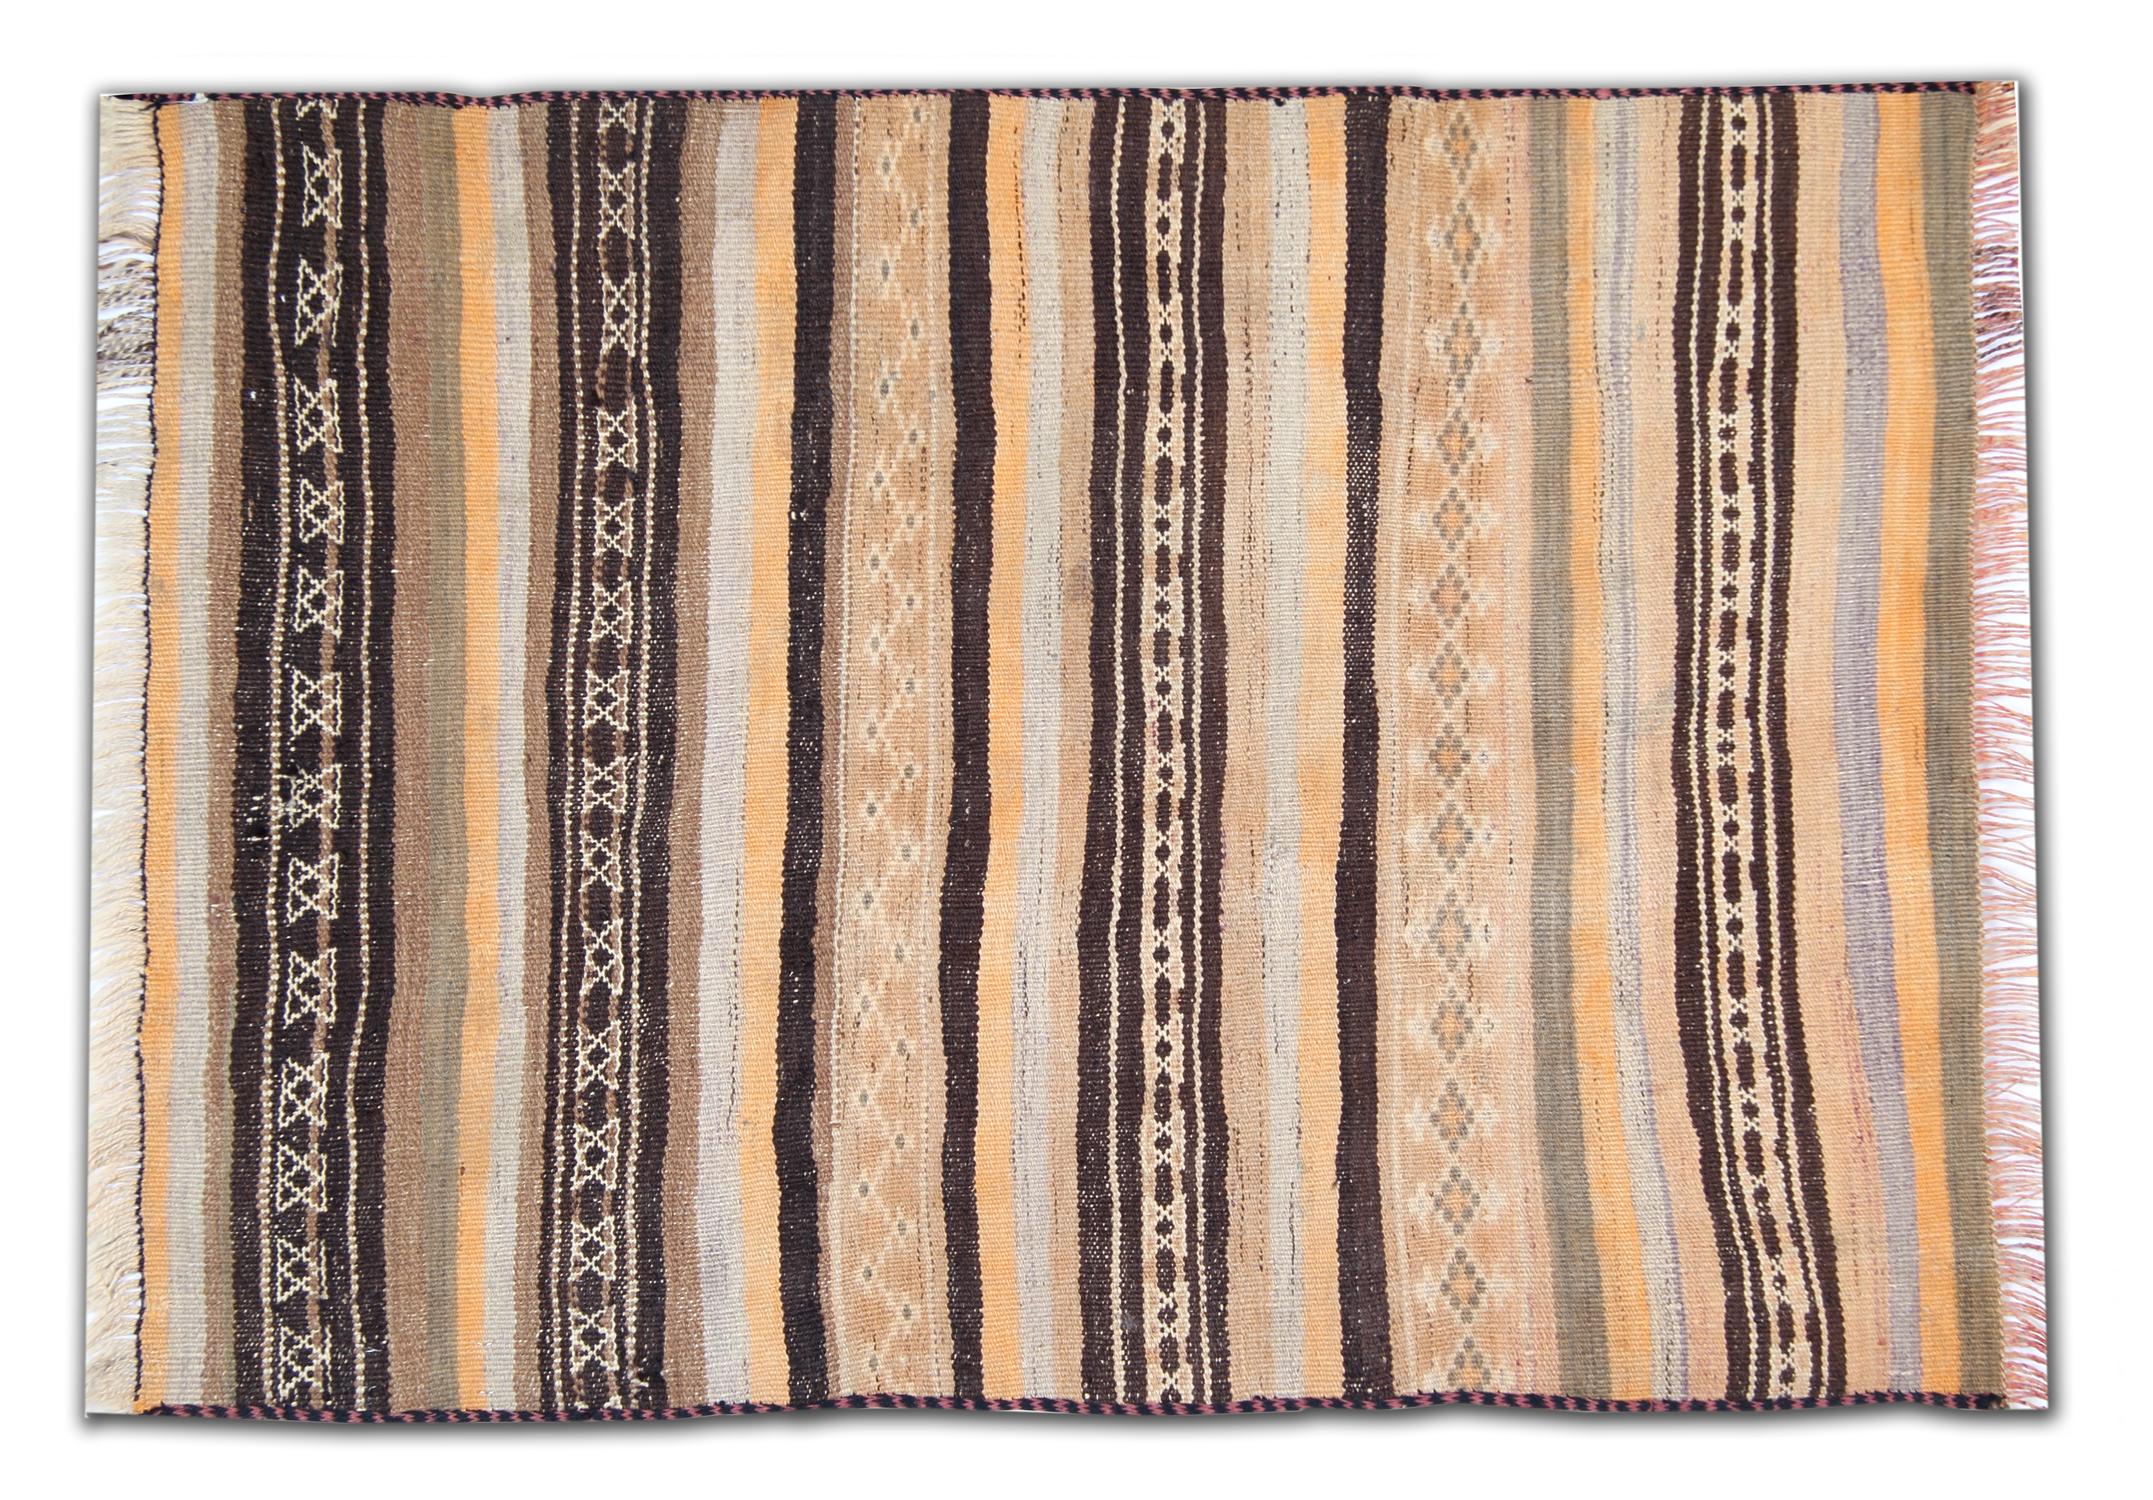 This fine wool rug is a handwoven vintage Kilim woven in Afghanistan in the 1960s. The central design features a simple rustic stripe design woven win beige, cream brown and yellow accent colours. Bold and beautiful this wool rug is sure to make the